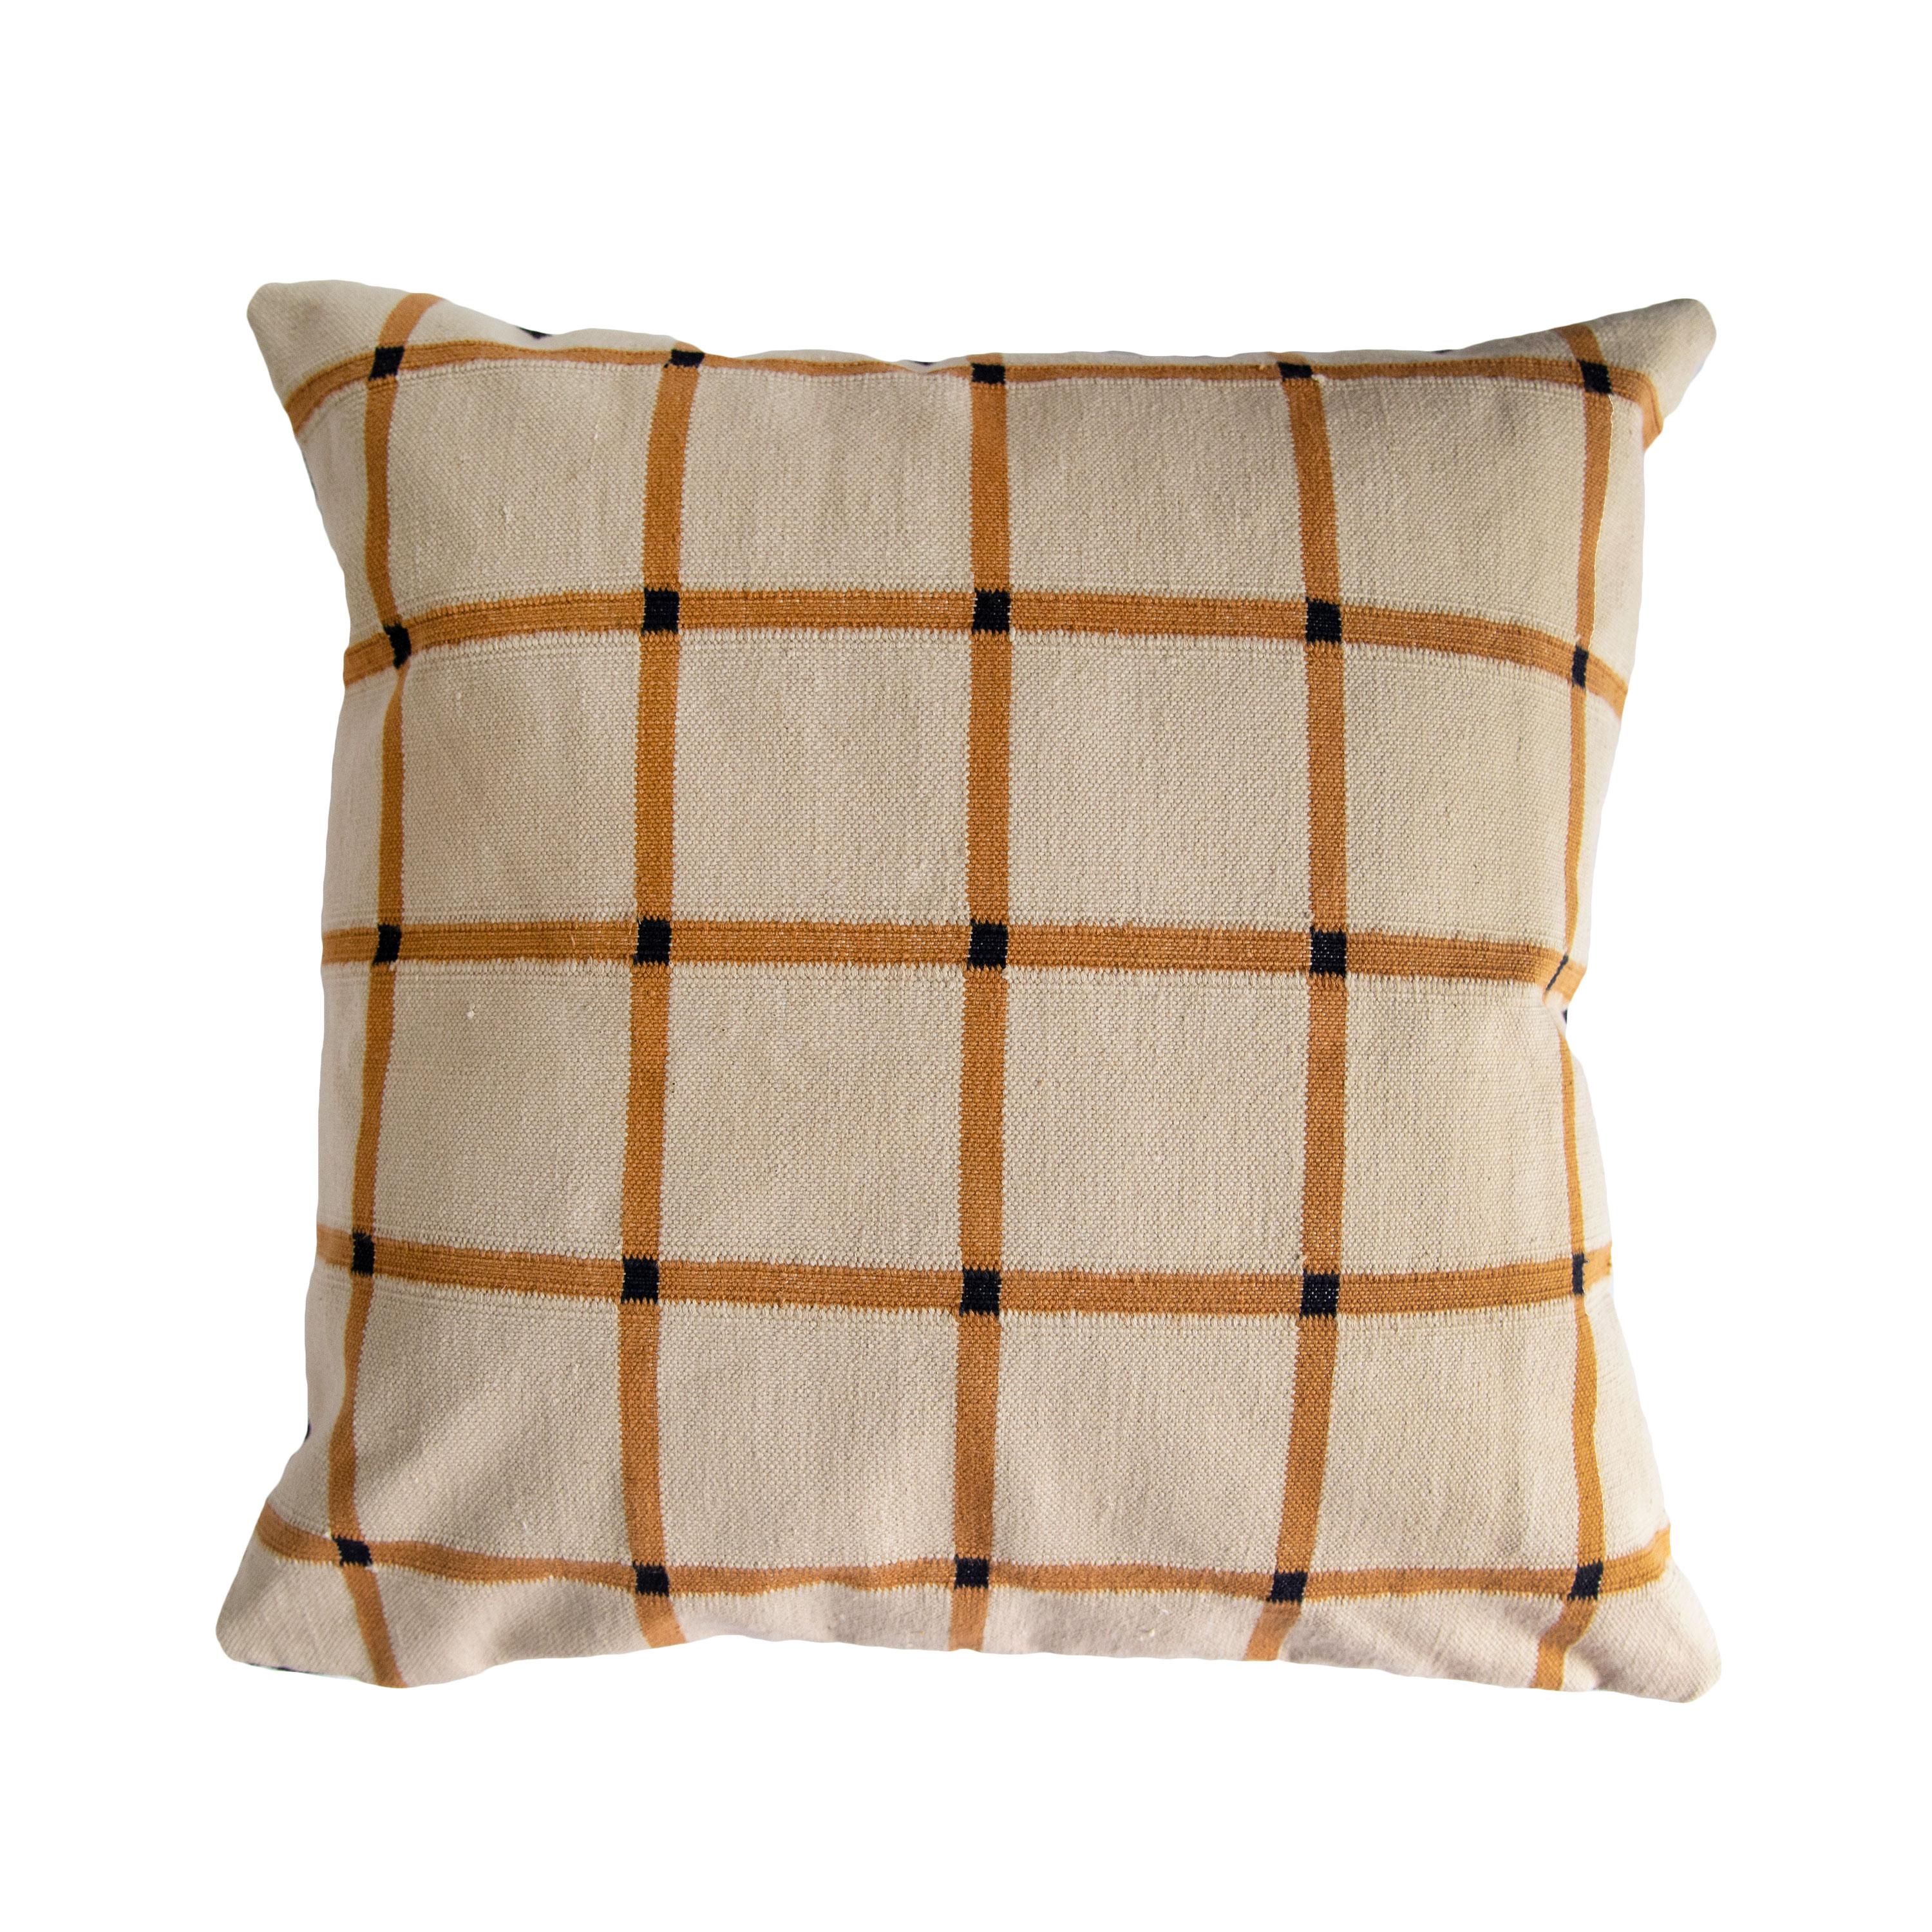 This pillow is reversible!

Our grid pillows are ethically hand woven by artisans in Rajasthan, India, using a traditional weaving technique which is native to this region.

The purchase of this handcrafted pillow helps to support the artisans